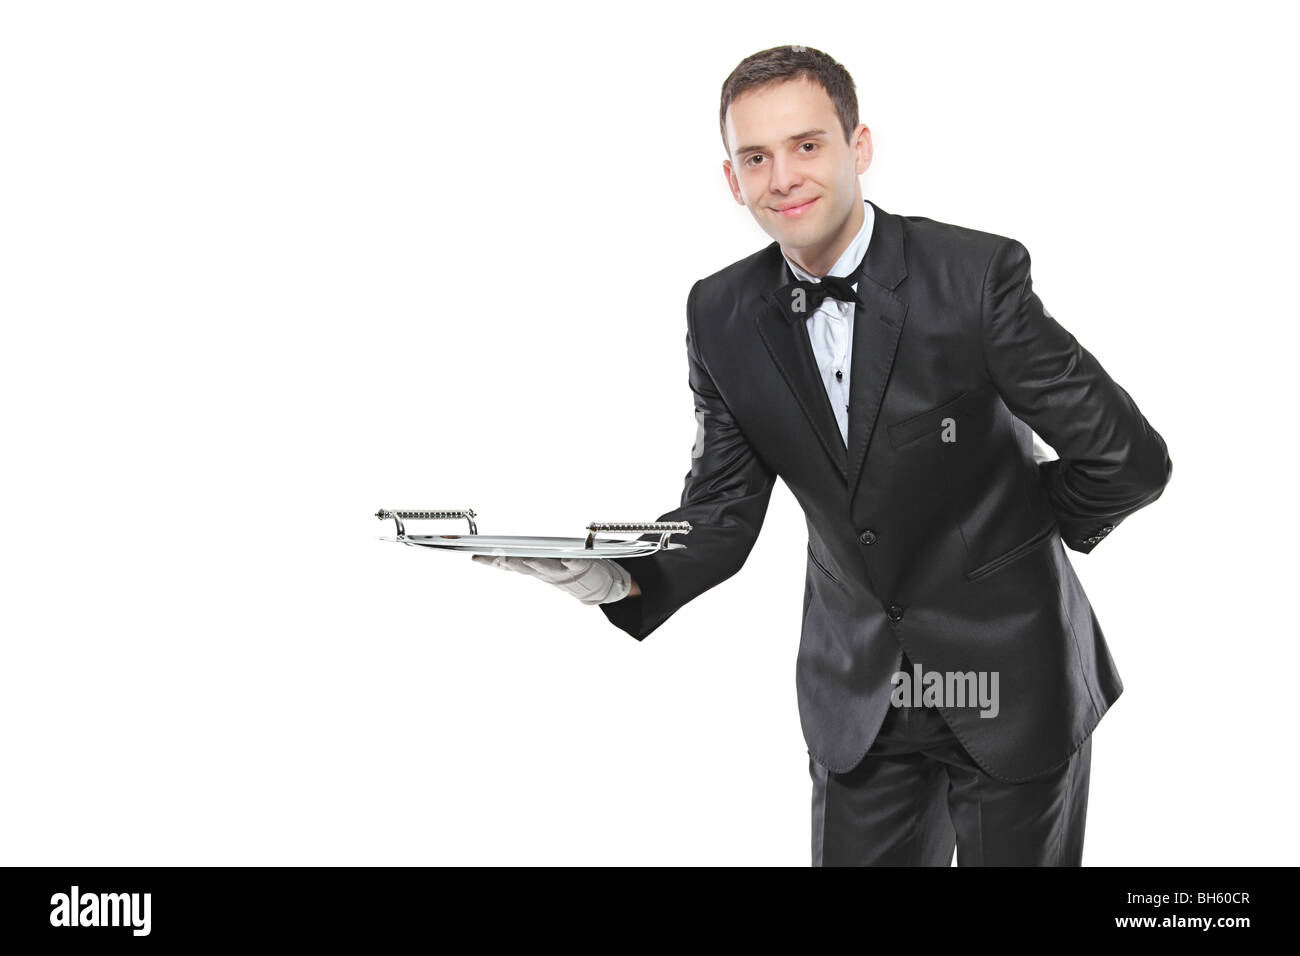 Waiter carrying an empty tray isolated on white background Stock Photo